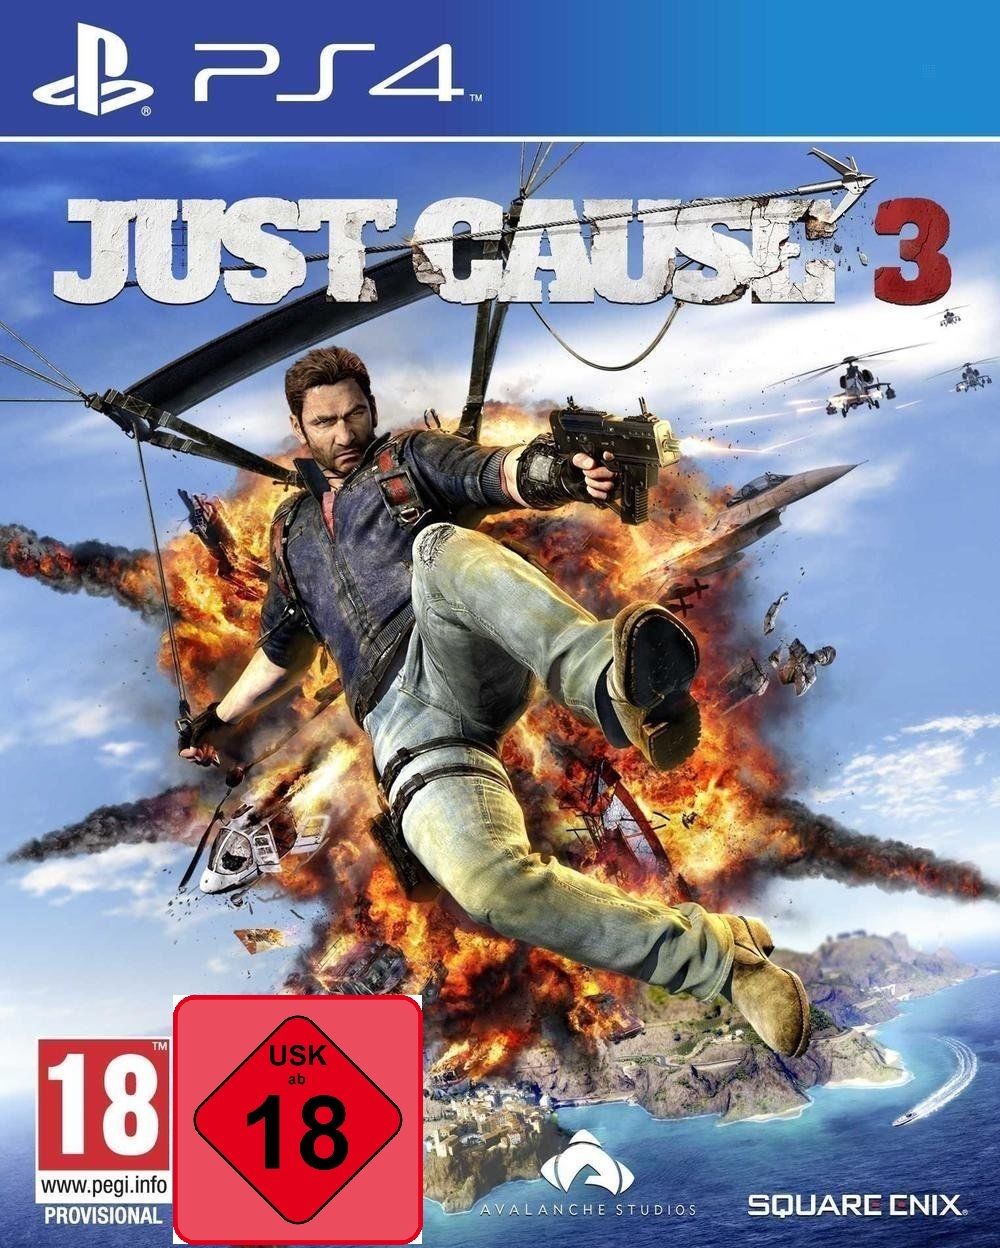 PS4 Spiel Just Cause 3 UNCUT  Playstation 4  NEUWARE OVP